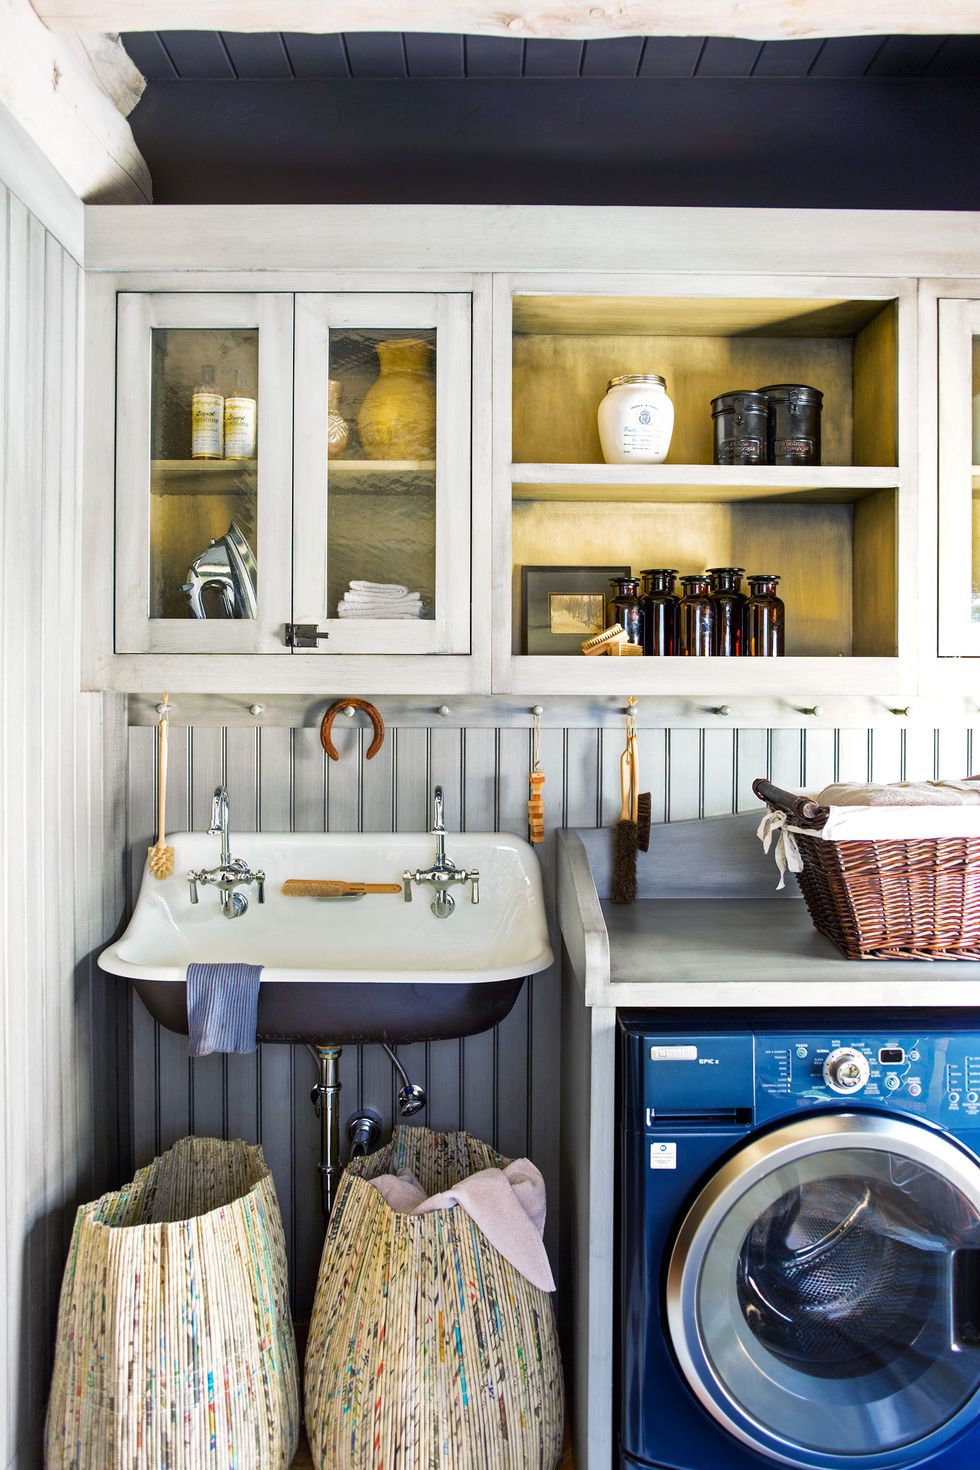 20 Laundry Room Organization Ideas to Declutter Your Space